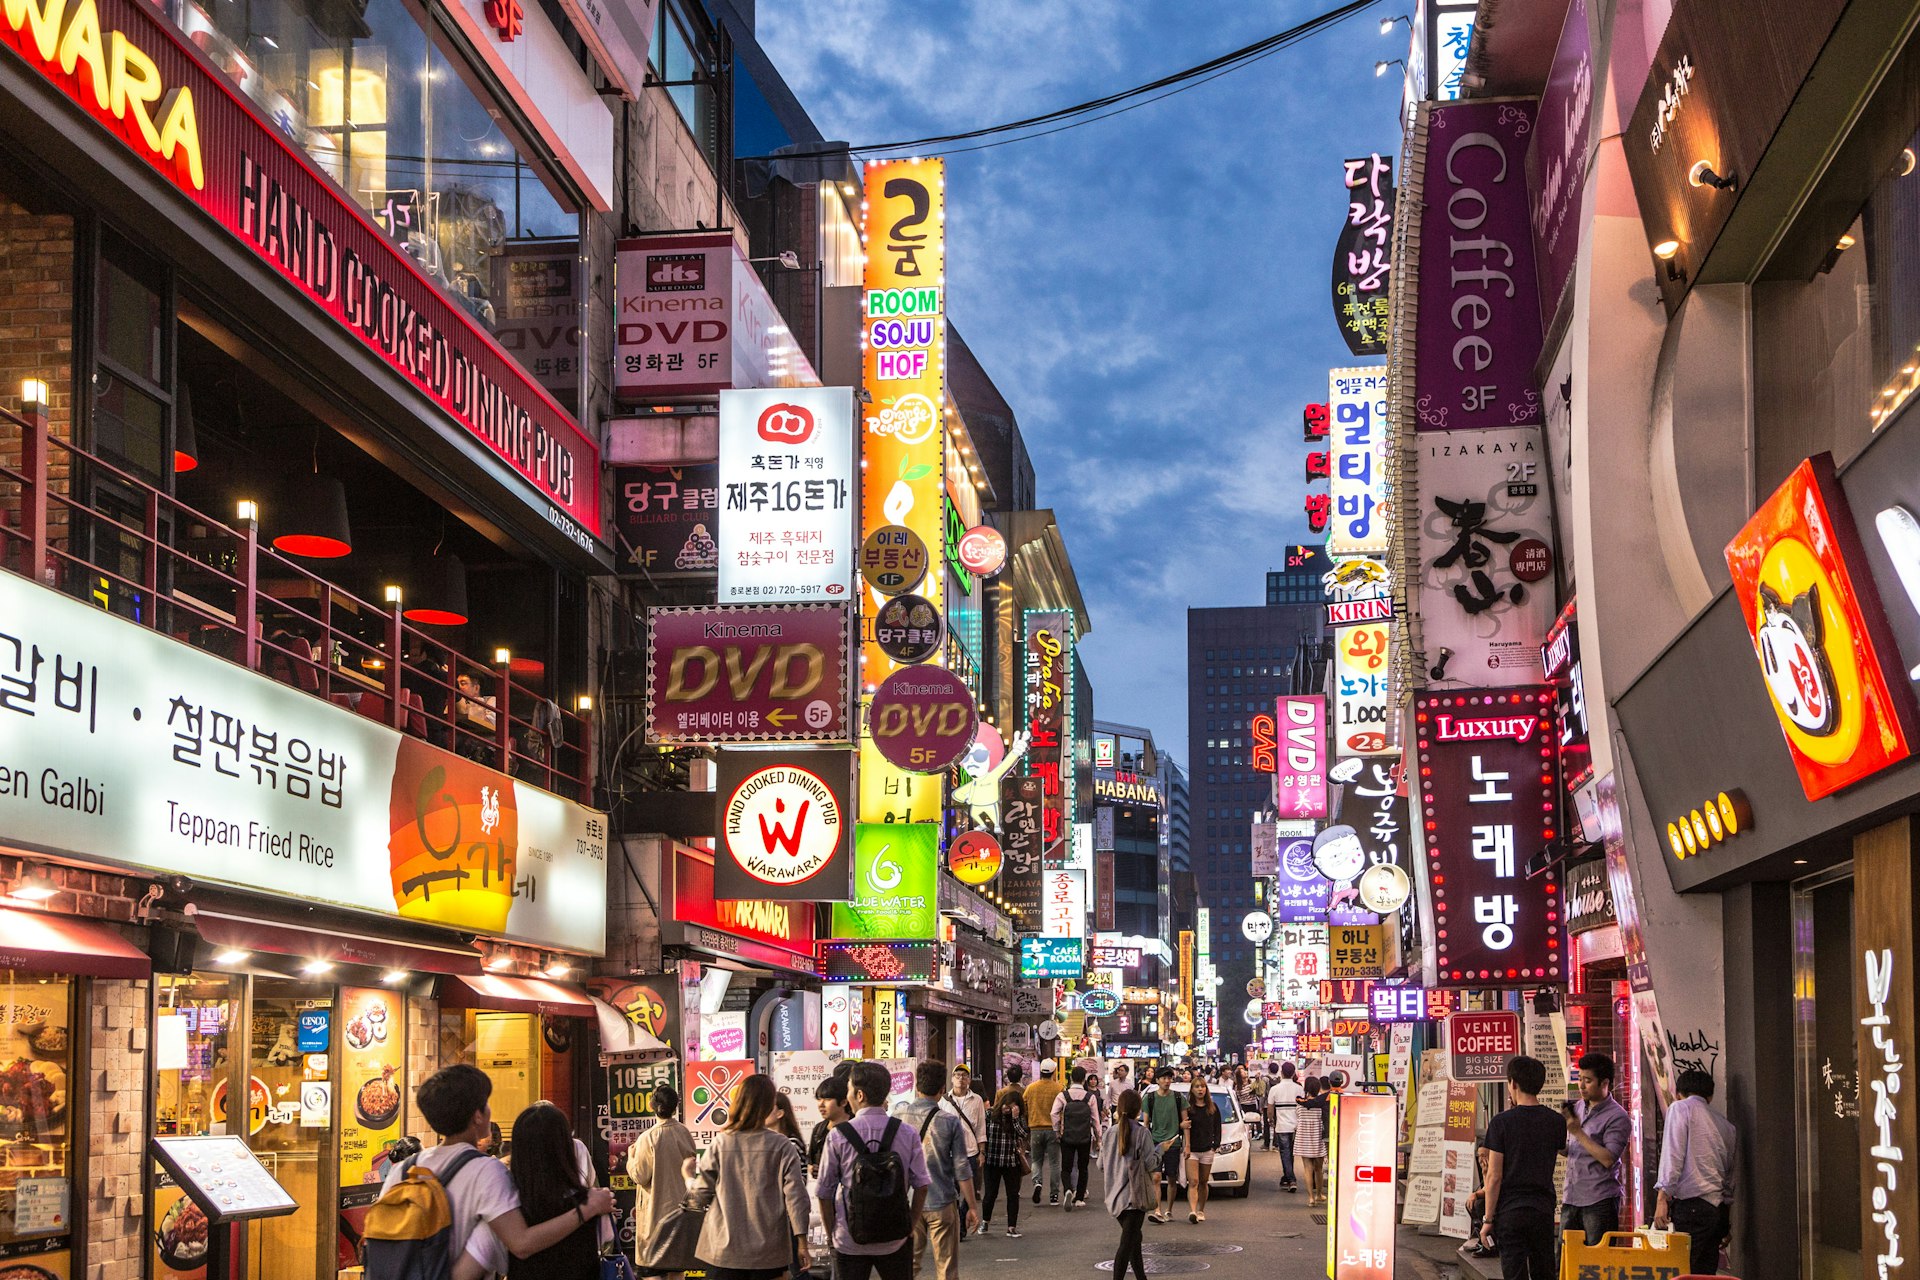 People wander in the walking street of the Myeong-dong shopping and entertainment district at night